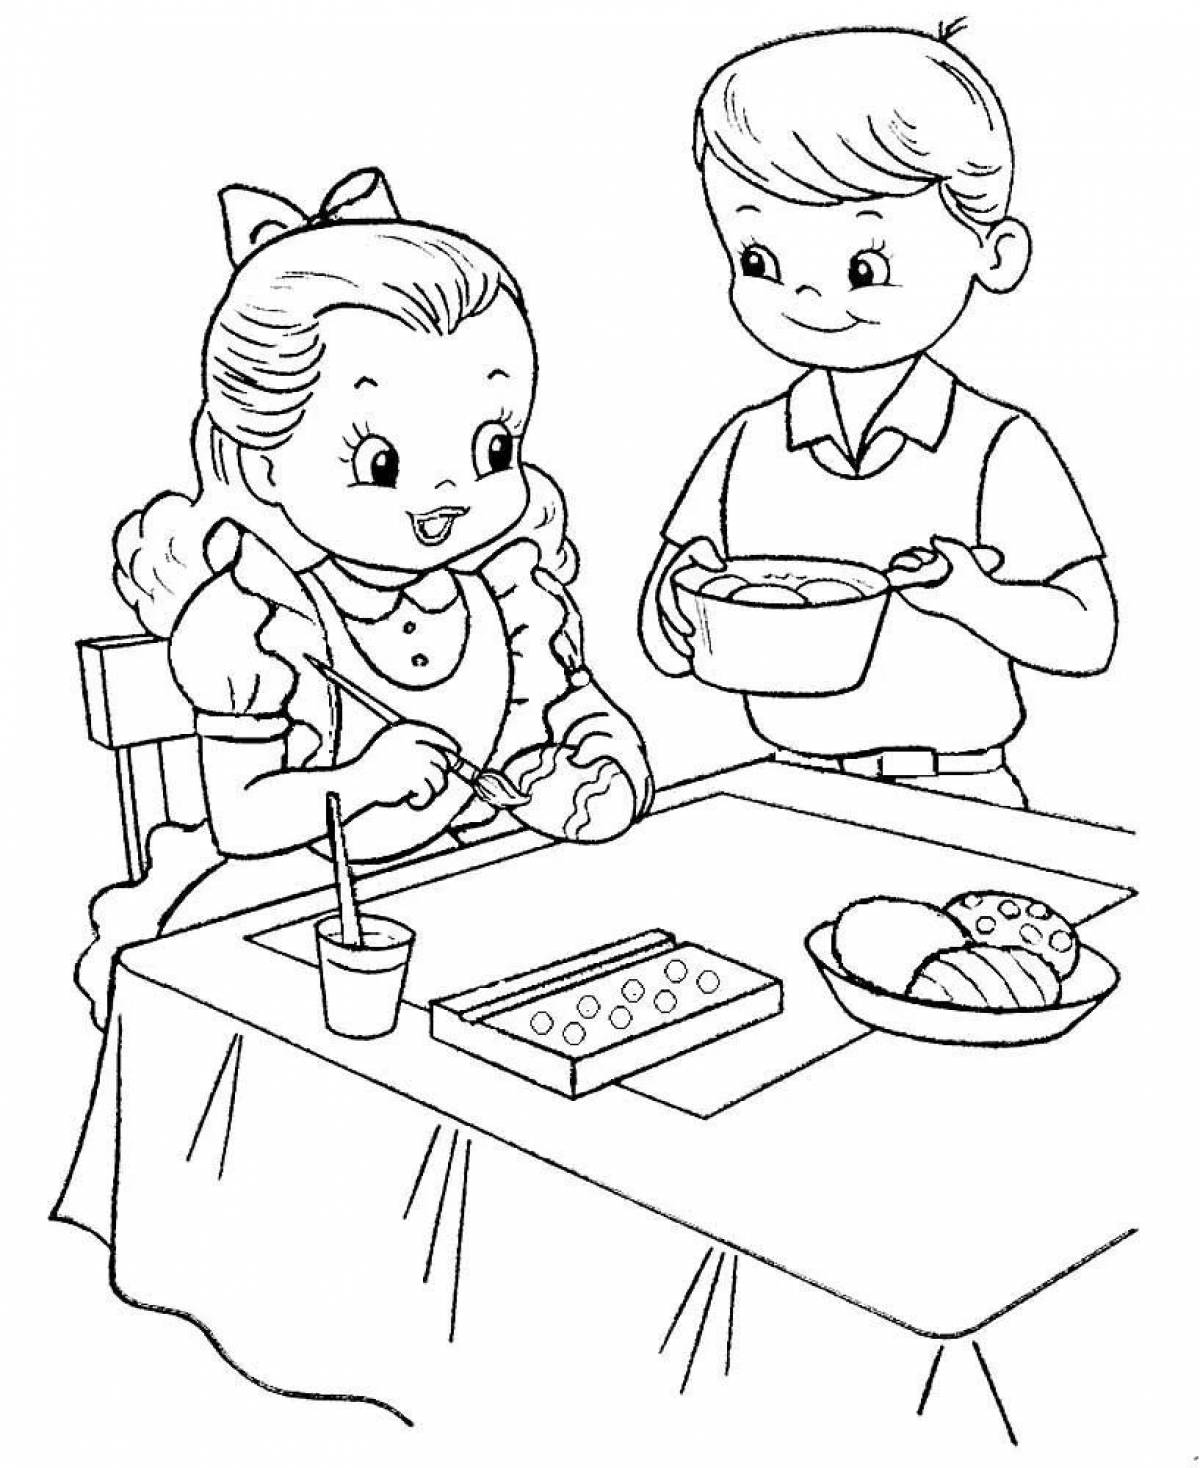 Etiquette for children 4 5 years old #28